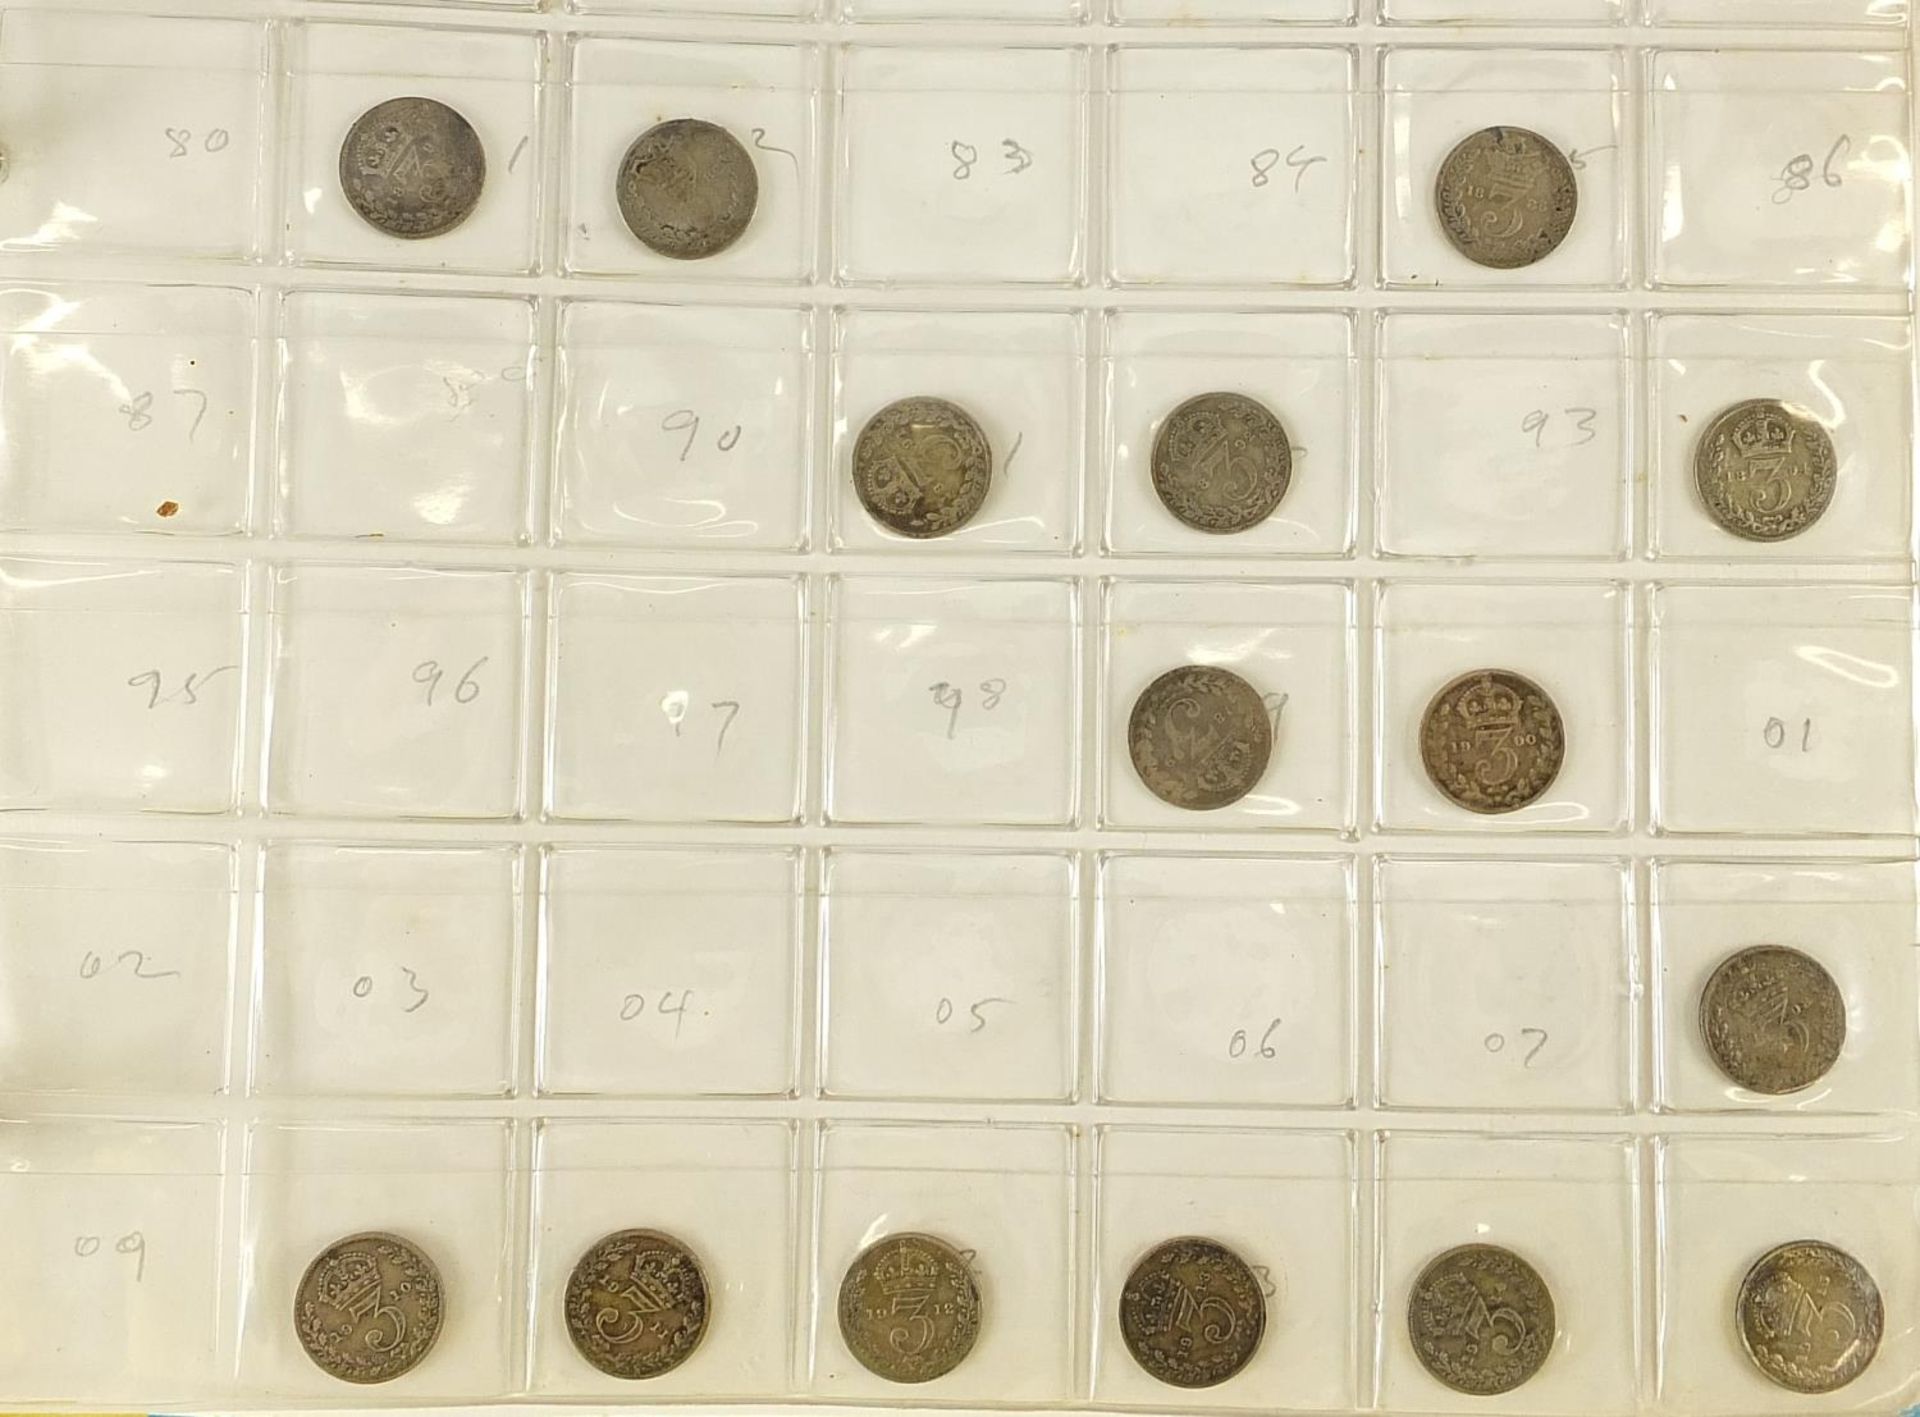 Victorian and later British coinage including silver threepenny bits arranged in an album - Image 4 of 6